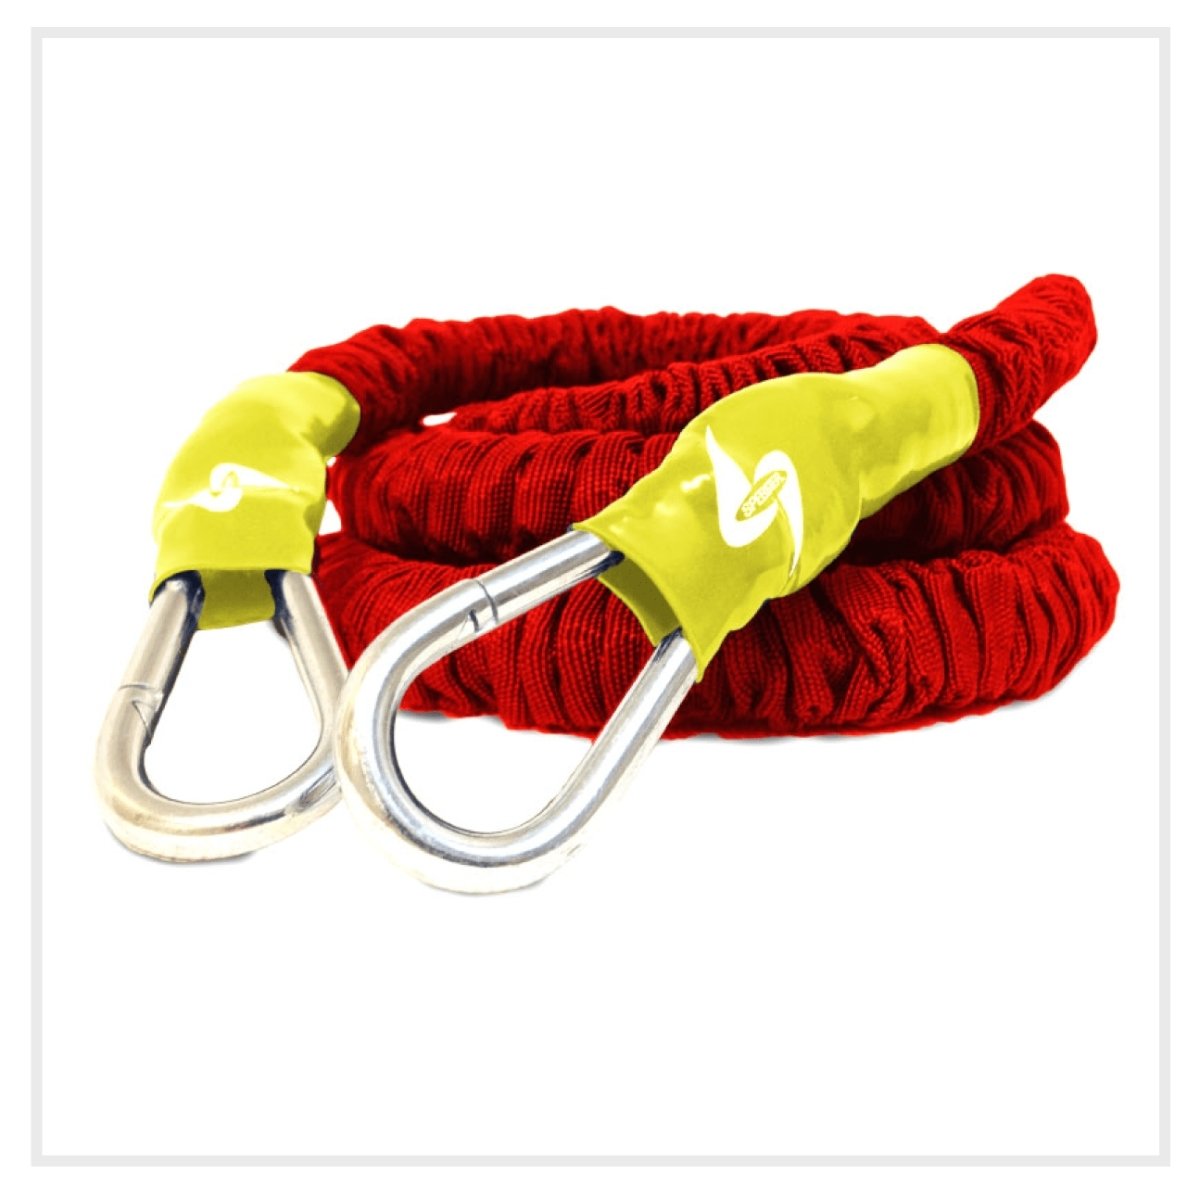 Rocket Bungee- Medium (4ft) best resistance bands made in USA and covered for safety - FitCord Resistance Bands